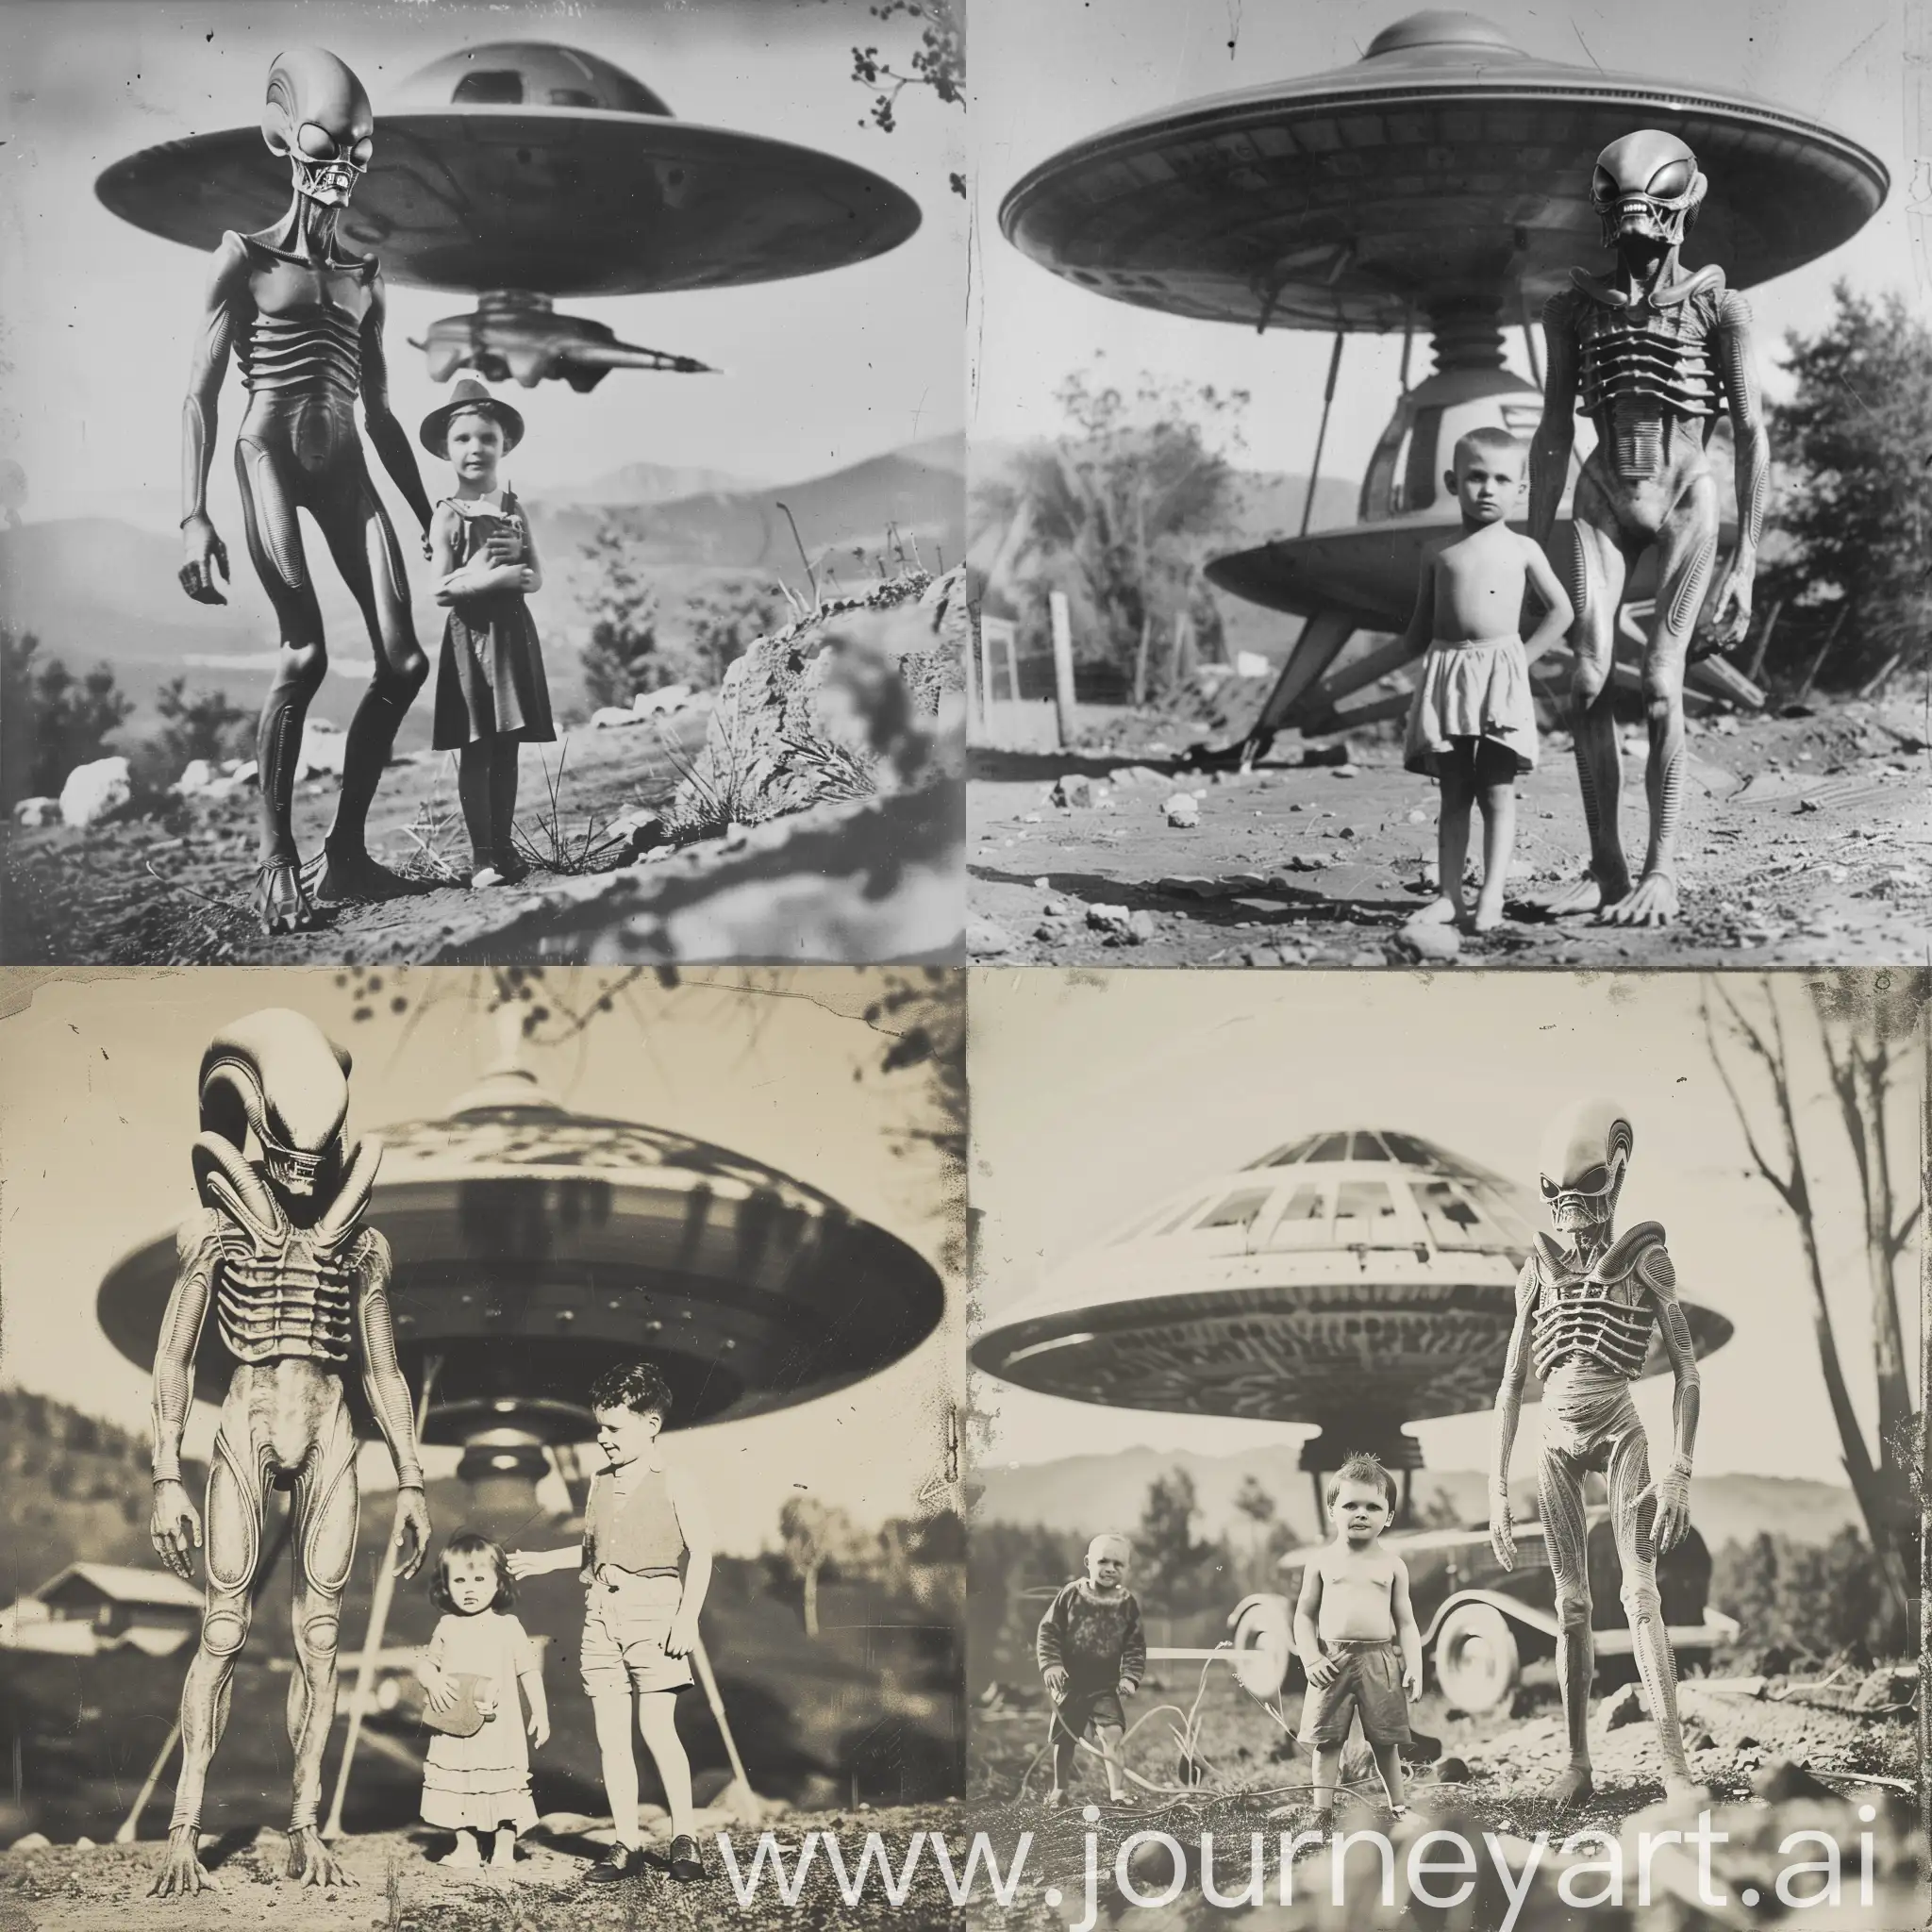 An realistic old black and white photo taken in 1930 of an alien creature standing with a child, a spaceship behind them, with real details, as if it were a realistic, non-fictional photo with real and clear features highly detailed --style raw 